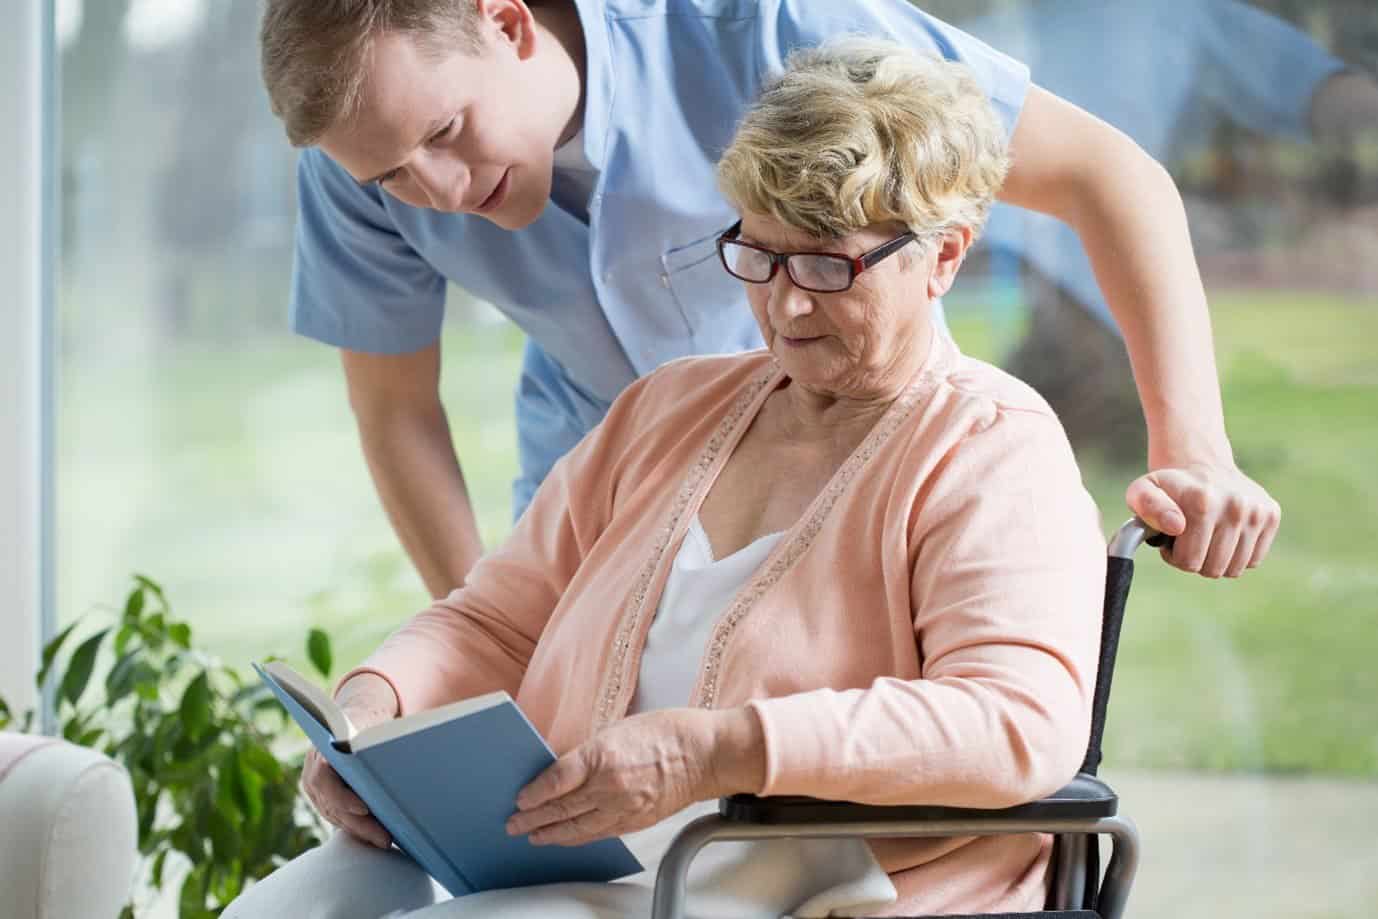 Male assisting elderly lady in wheelchair